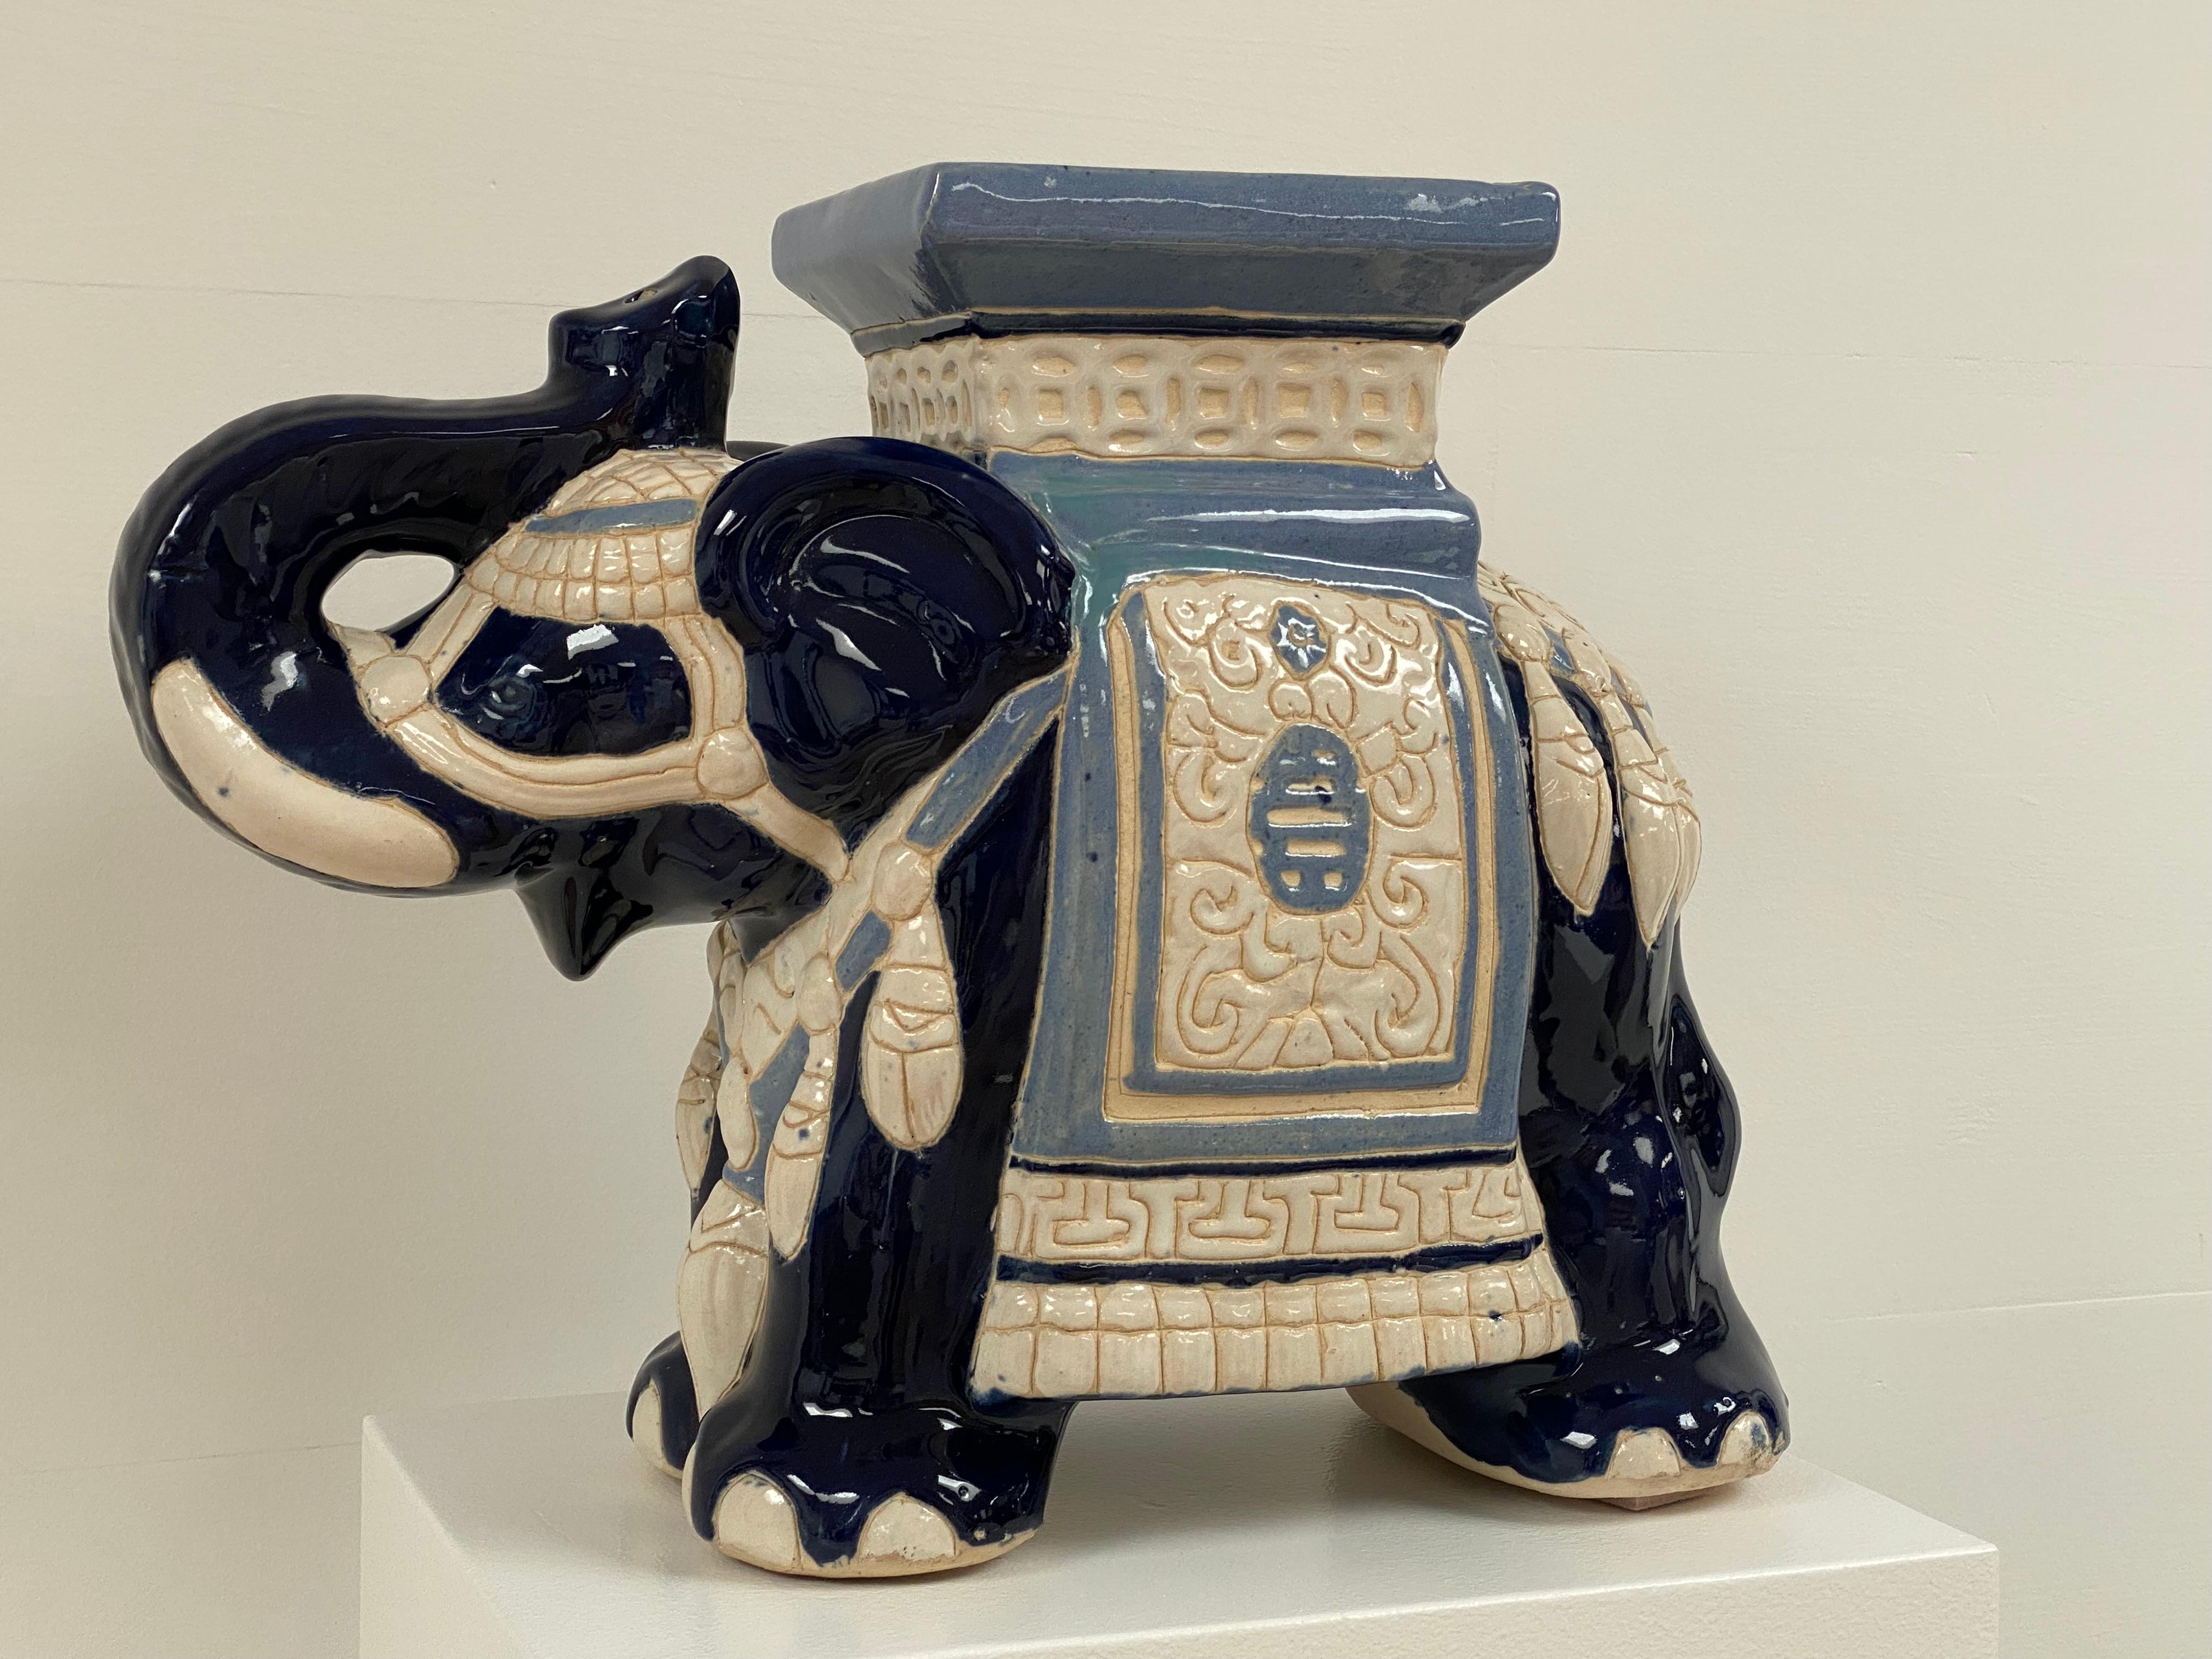 Very Decorative terracotta elephant in a variety of Blue Colors,
Oriental Decorations,can be used as a decorative object as wel as a side table or stool.